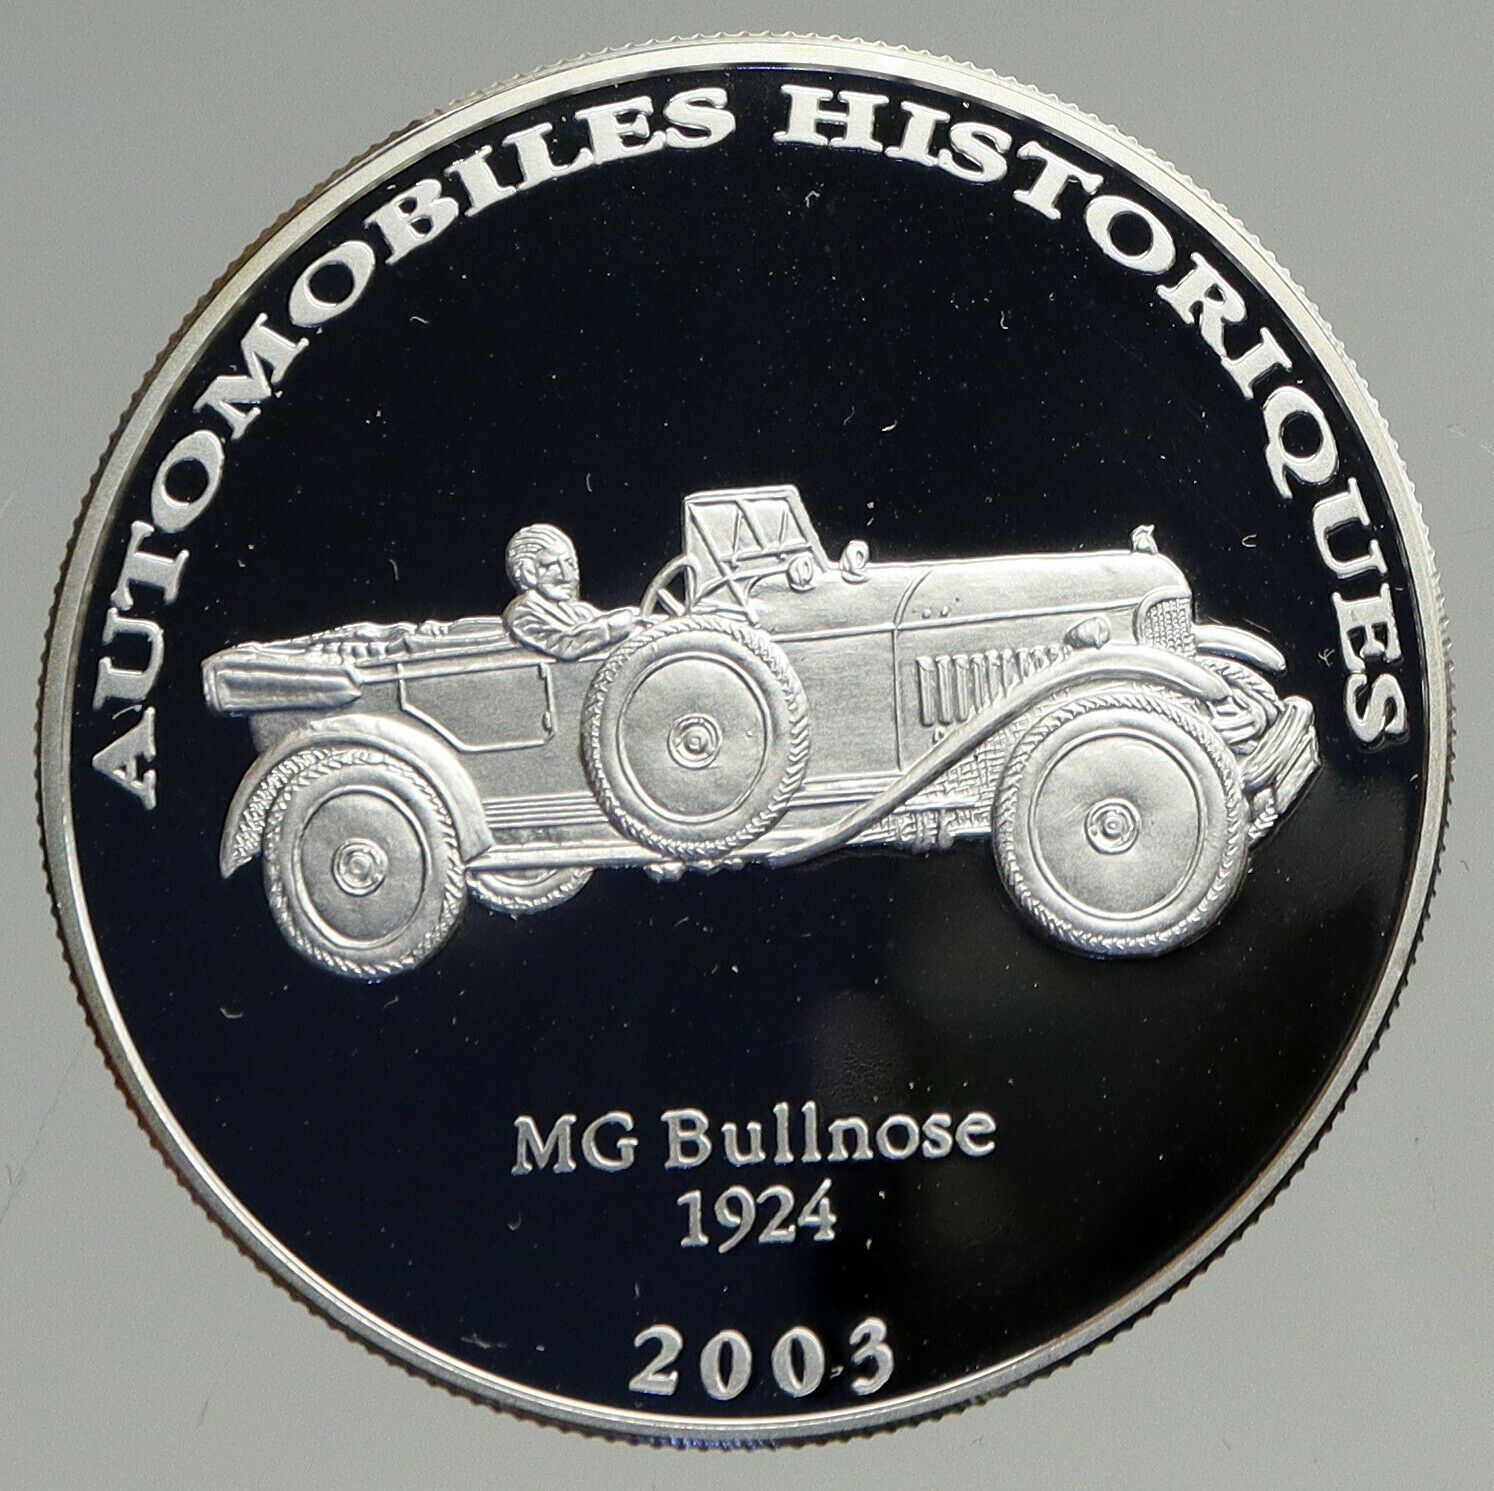 2003 CONGO MG Bullnose 1924 AUTOMOBILE Old Proof Silver 10 Francs Coin i94573